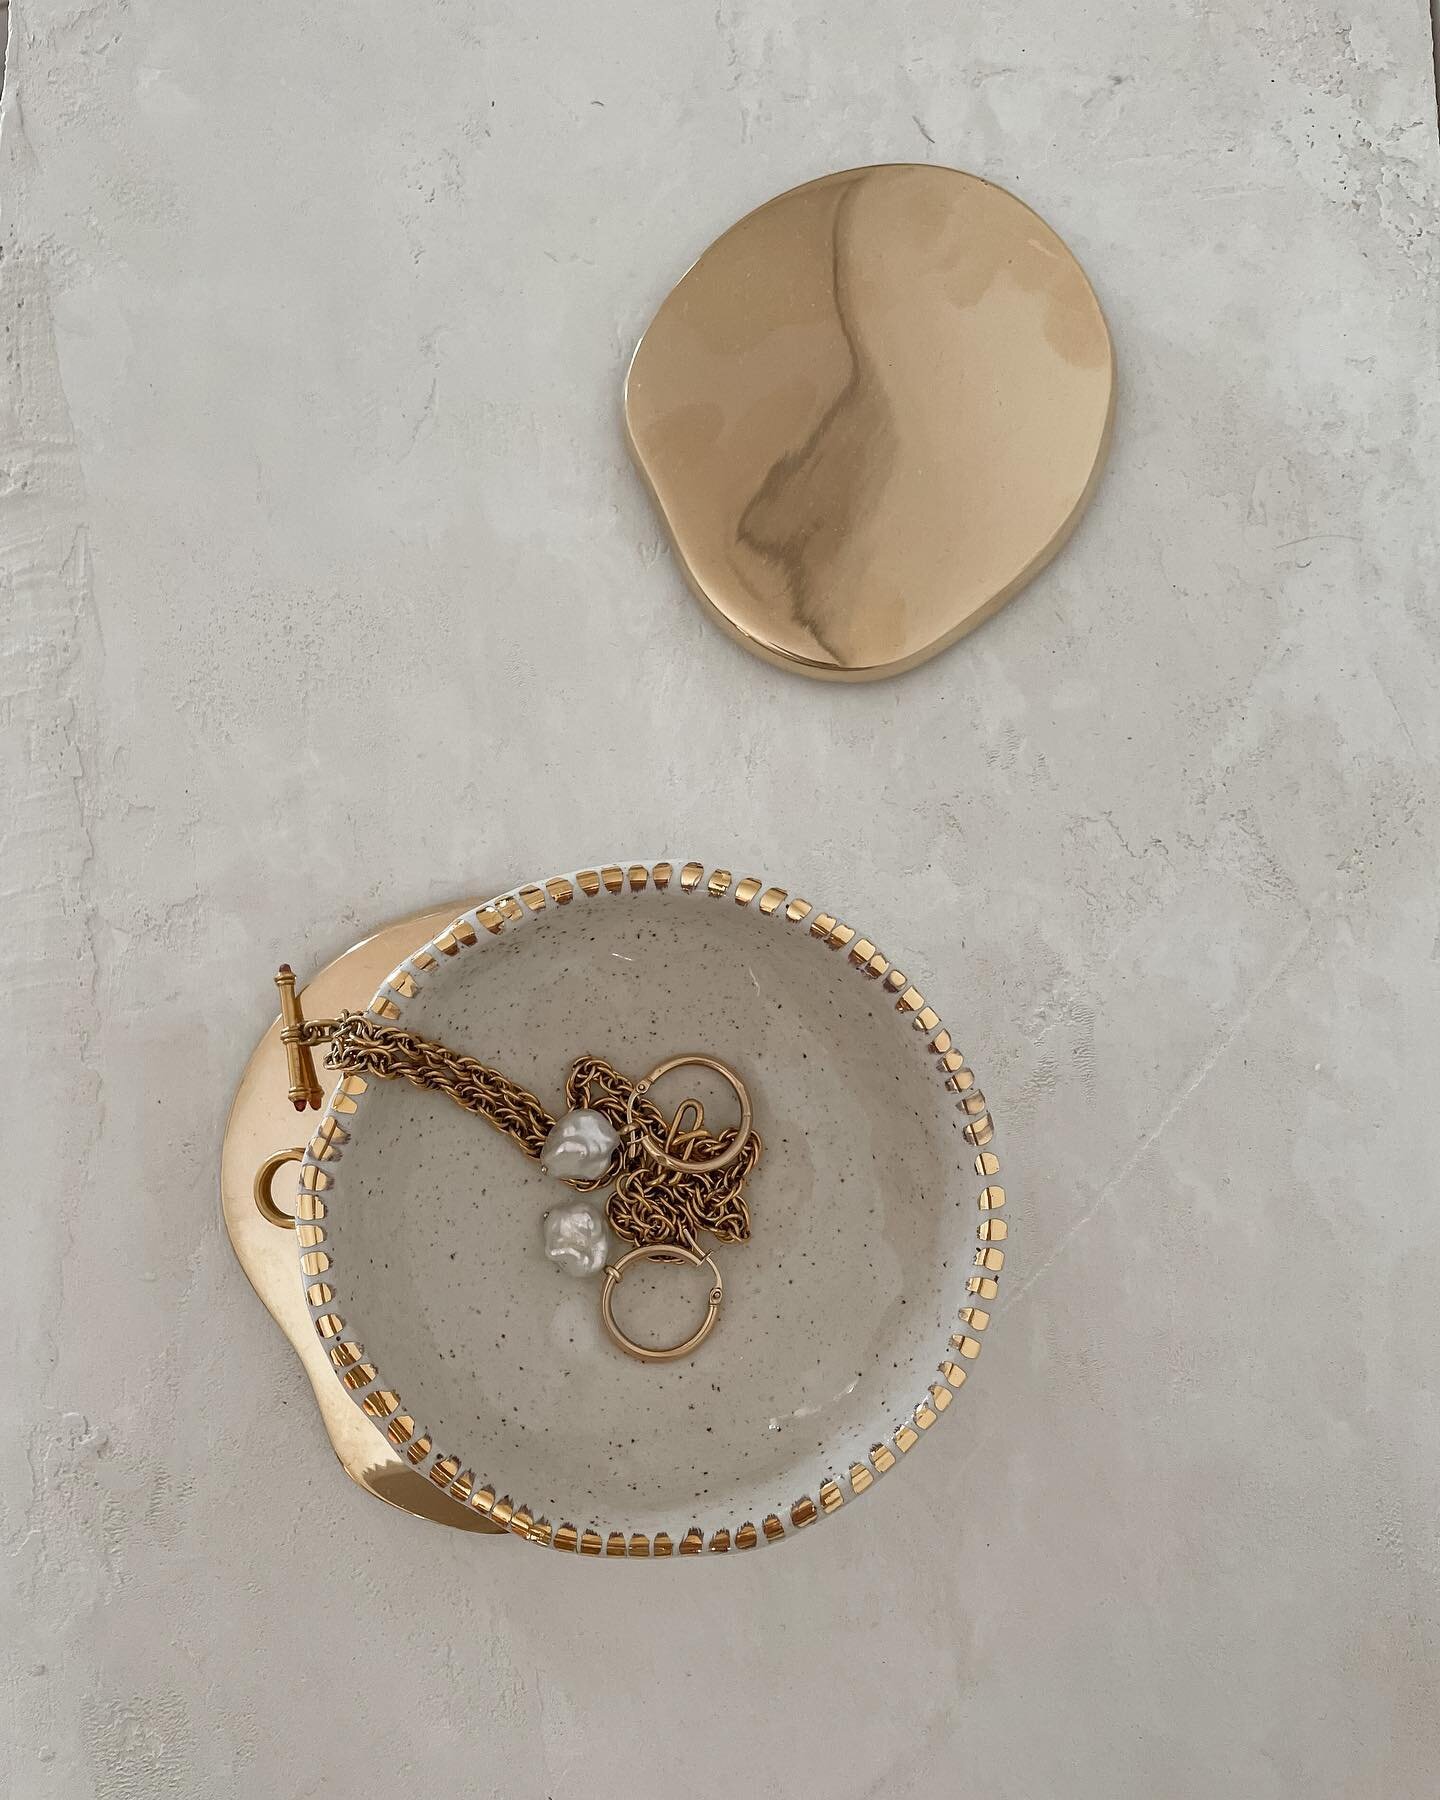 Obsessed with these new Golden Hour Trinket Dishes. Pinched from a speckled stoneware, dipped in a milky-white glaze and hand painted with 18ct gold.

Perfect to house your precious jewels, or use on the table with salt, olives or condiments.

Online